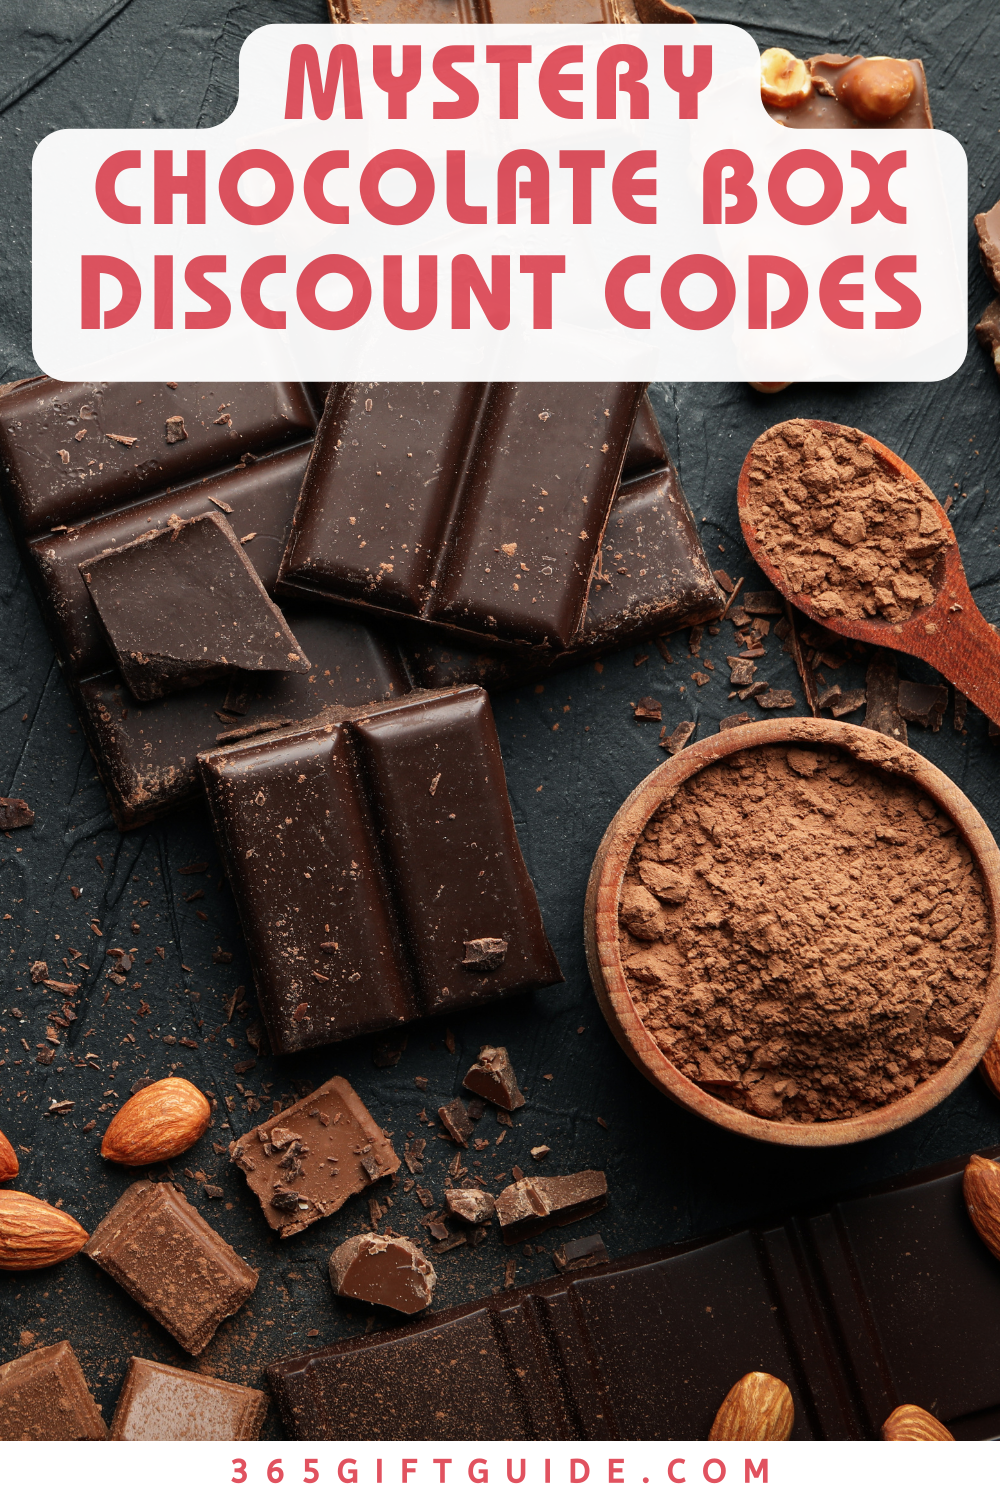 Mystery-Chocolate-Box-Discount-Codes